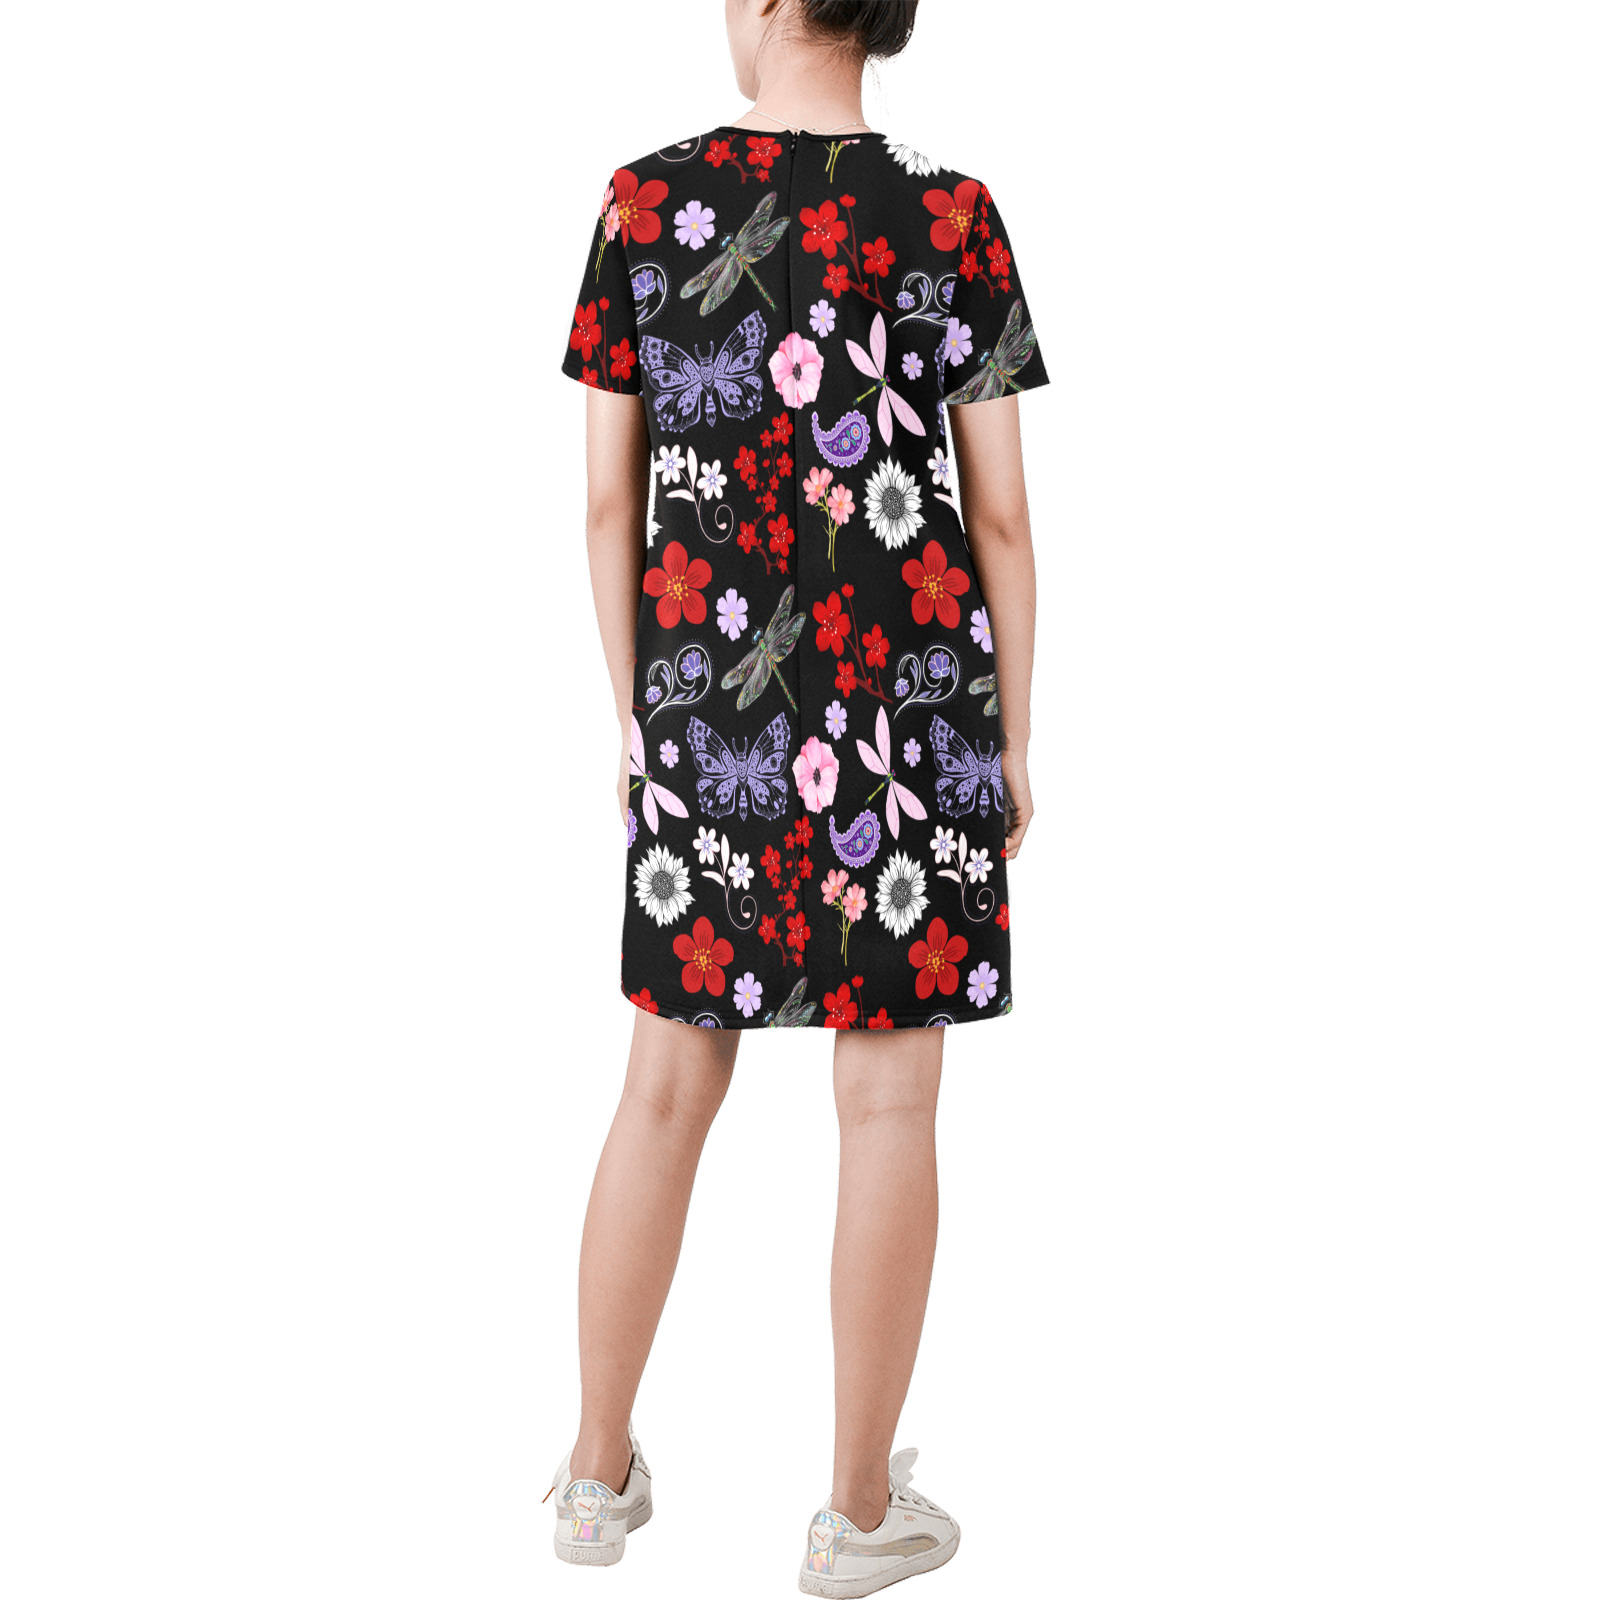 Black, Red, Pink, Purple, Dragonflies, Butterfly and Flowers Design Short-Sleeve Round Neck A-Line Dress (Model D47)